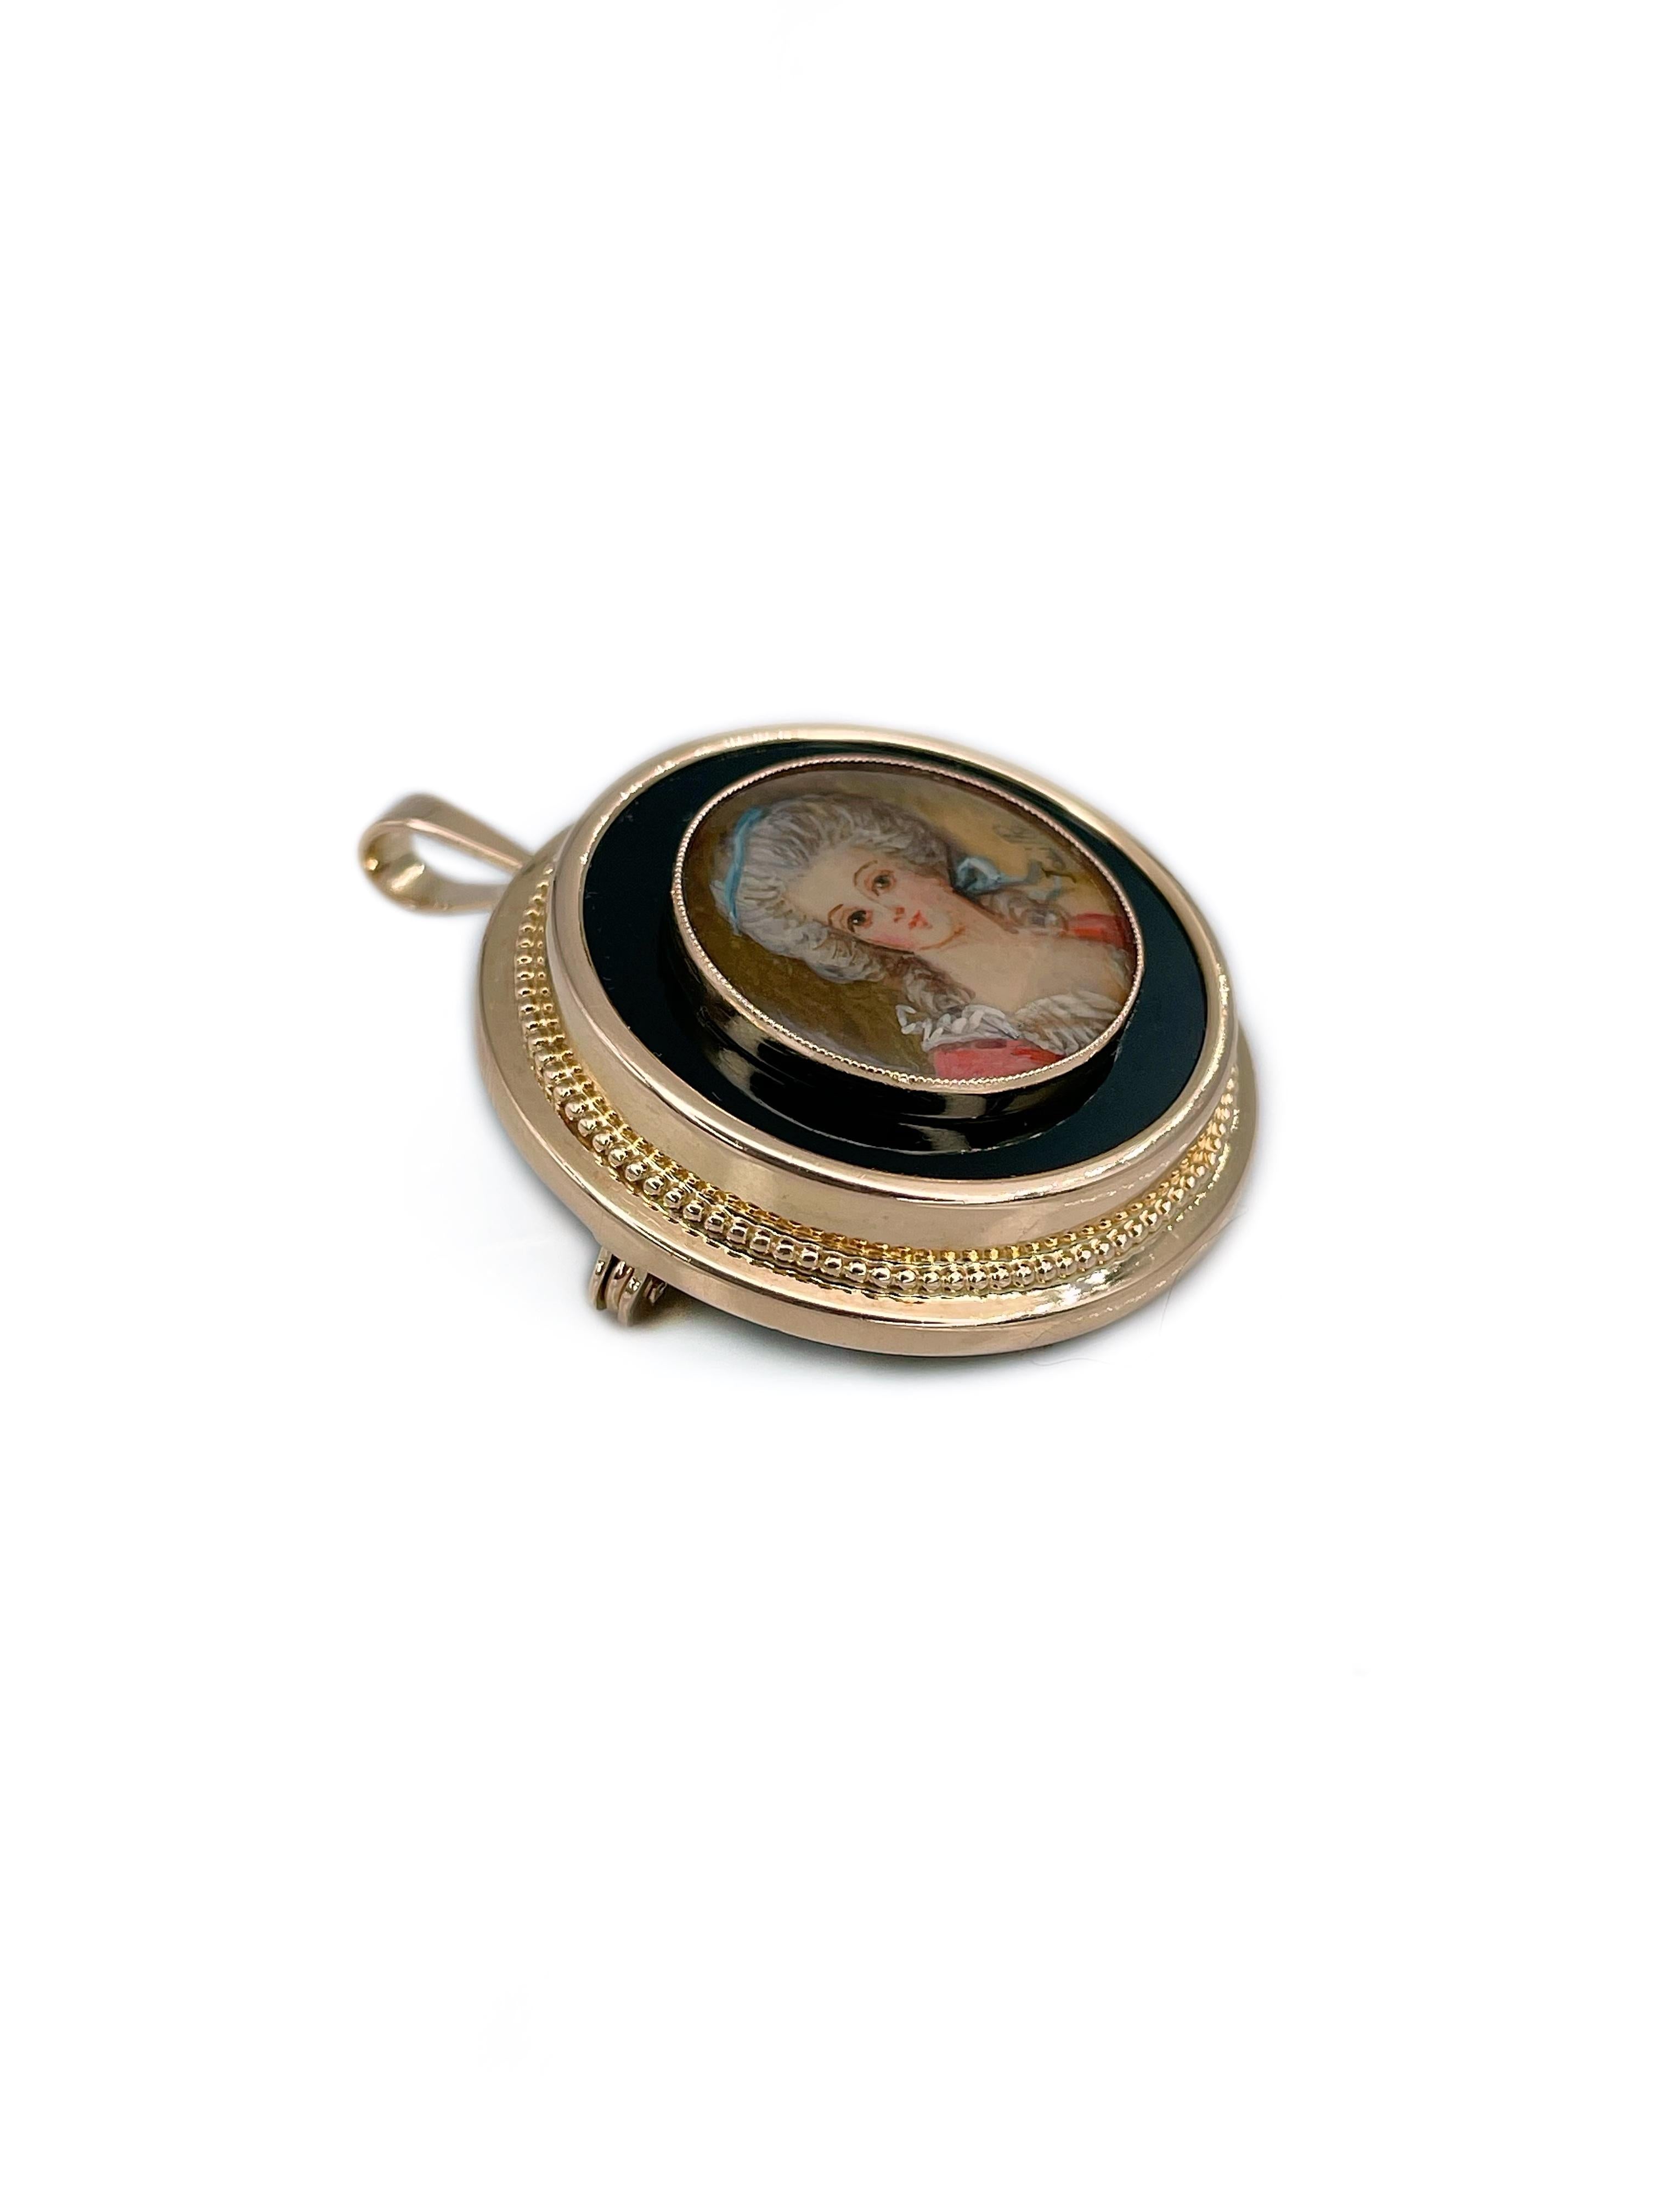 This is a Victorian round pendant-brooch crafted in 18K yellow gold. Circa 1900.

The piece features a detailed miniature portrait of a charming lady. It is hand painted and inserted into onyx. There is a signature of an author. 

Weight: